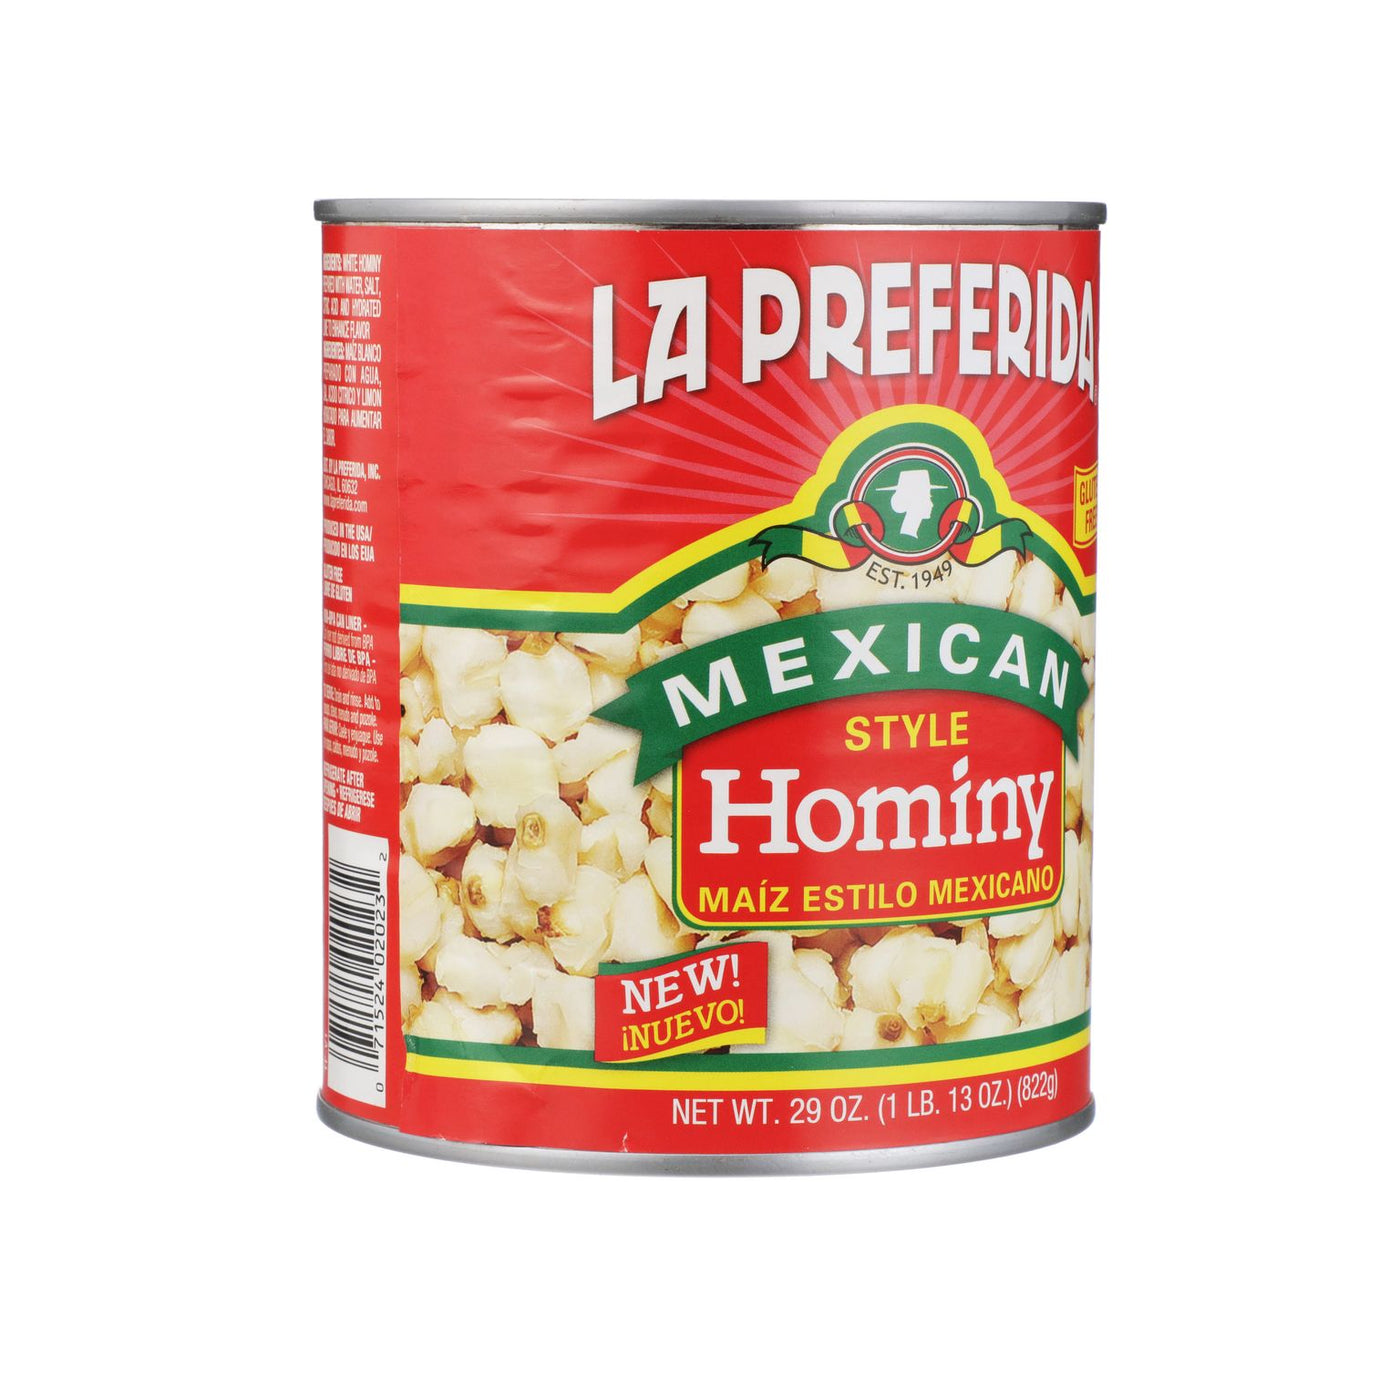 Mexican-Style Hominy